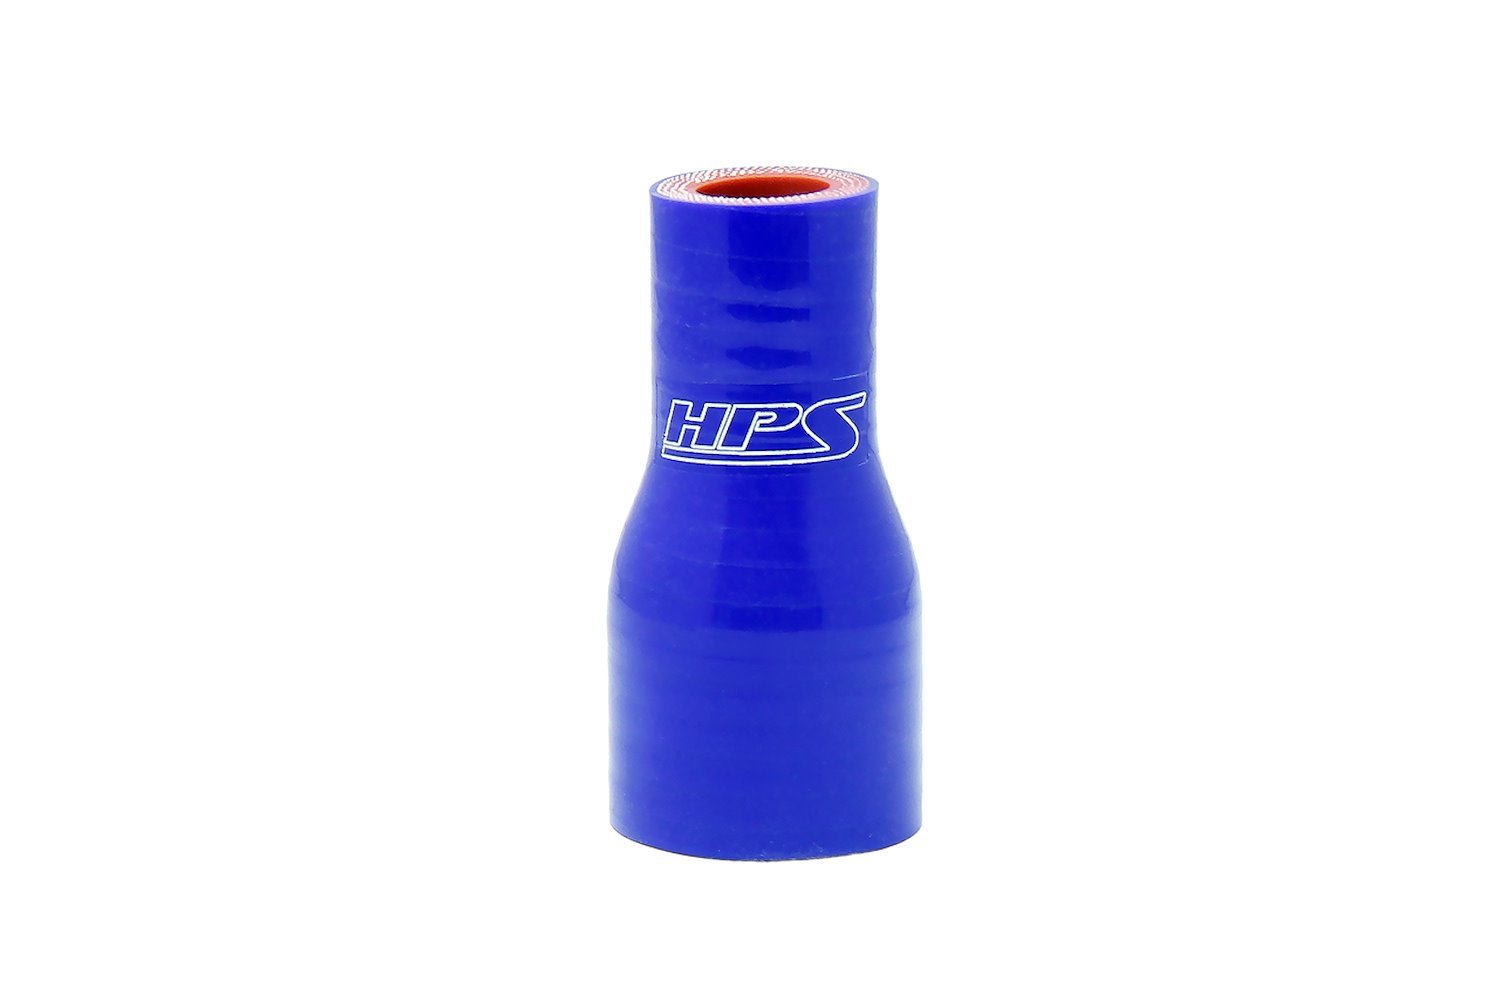 HTSR-062-112-BLUE Silicone Reducer Hose, High-Temp 4-Ply Reinforced, 5/8 in. - 1-1/8 in. ID, 3 in. Long, Blue